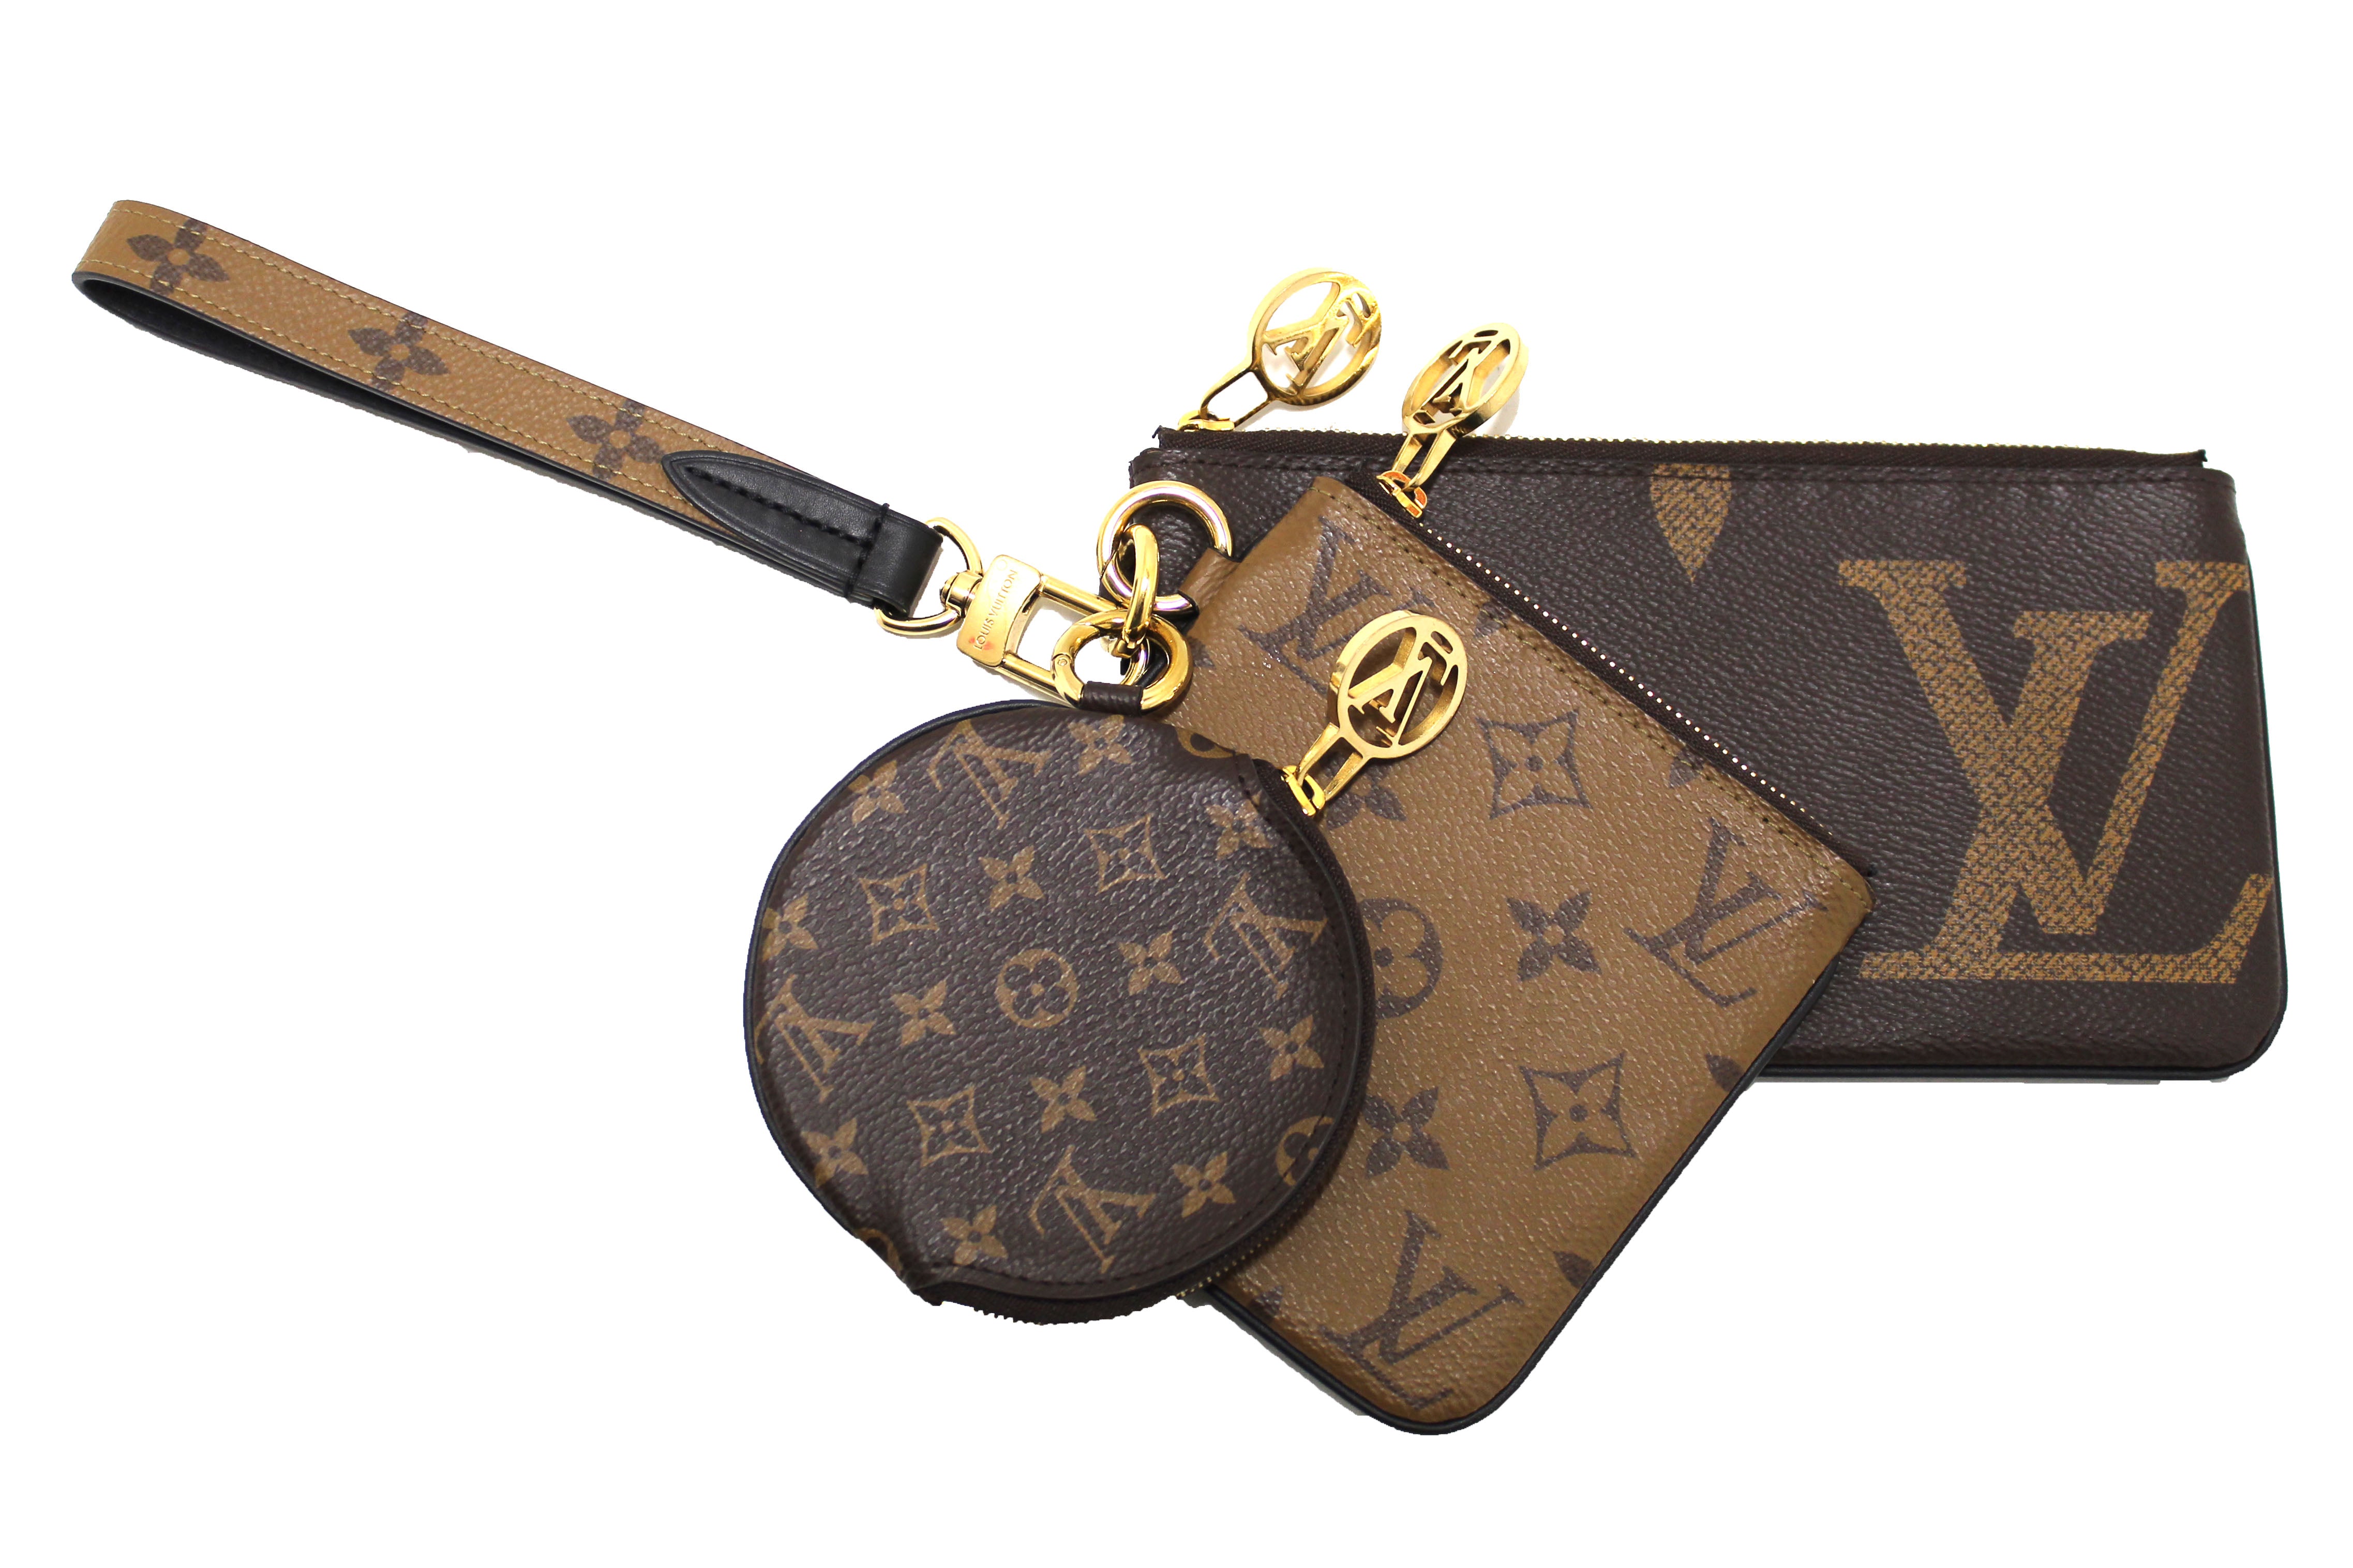 LV Trio Large Wristlet Pouch in Giant Monogram Canvas GHW